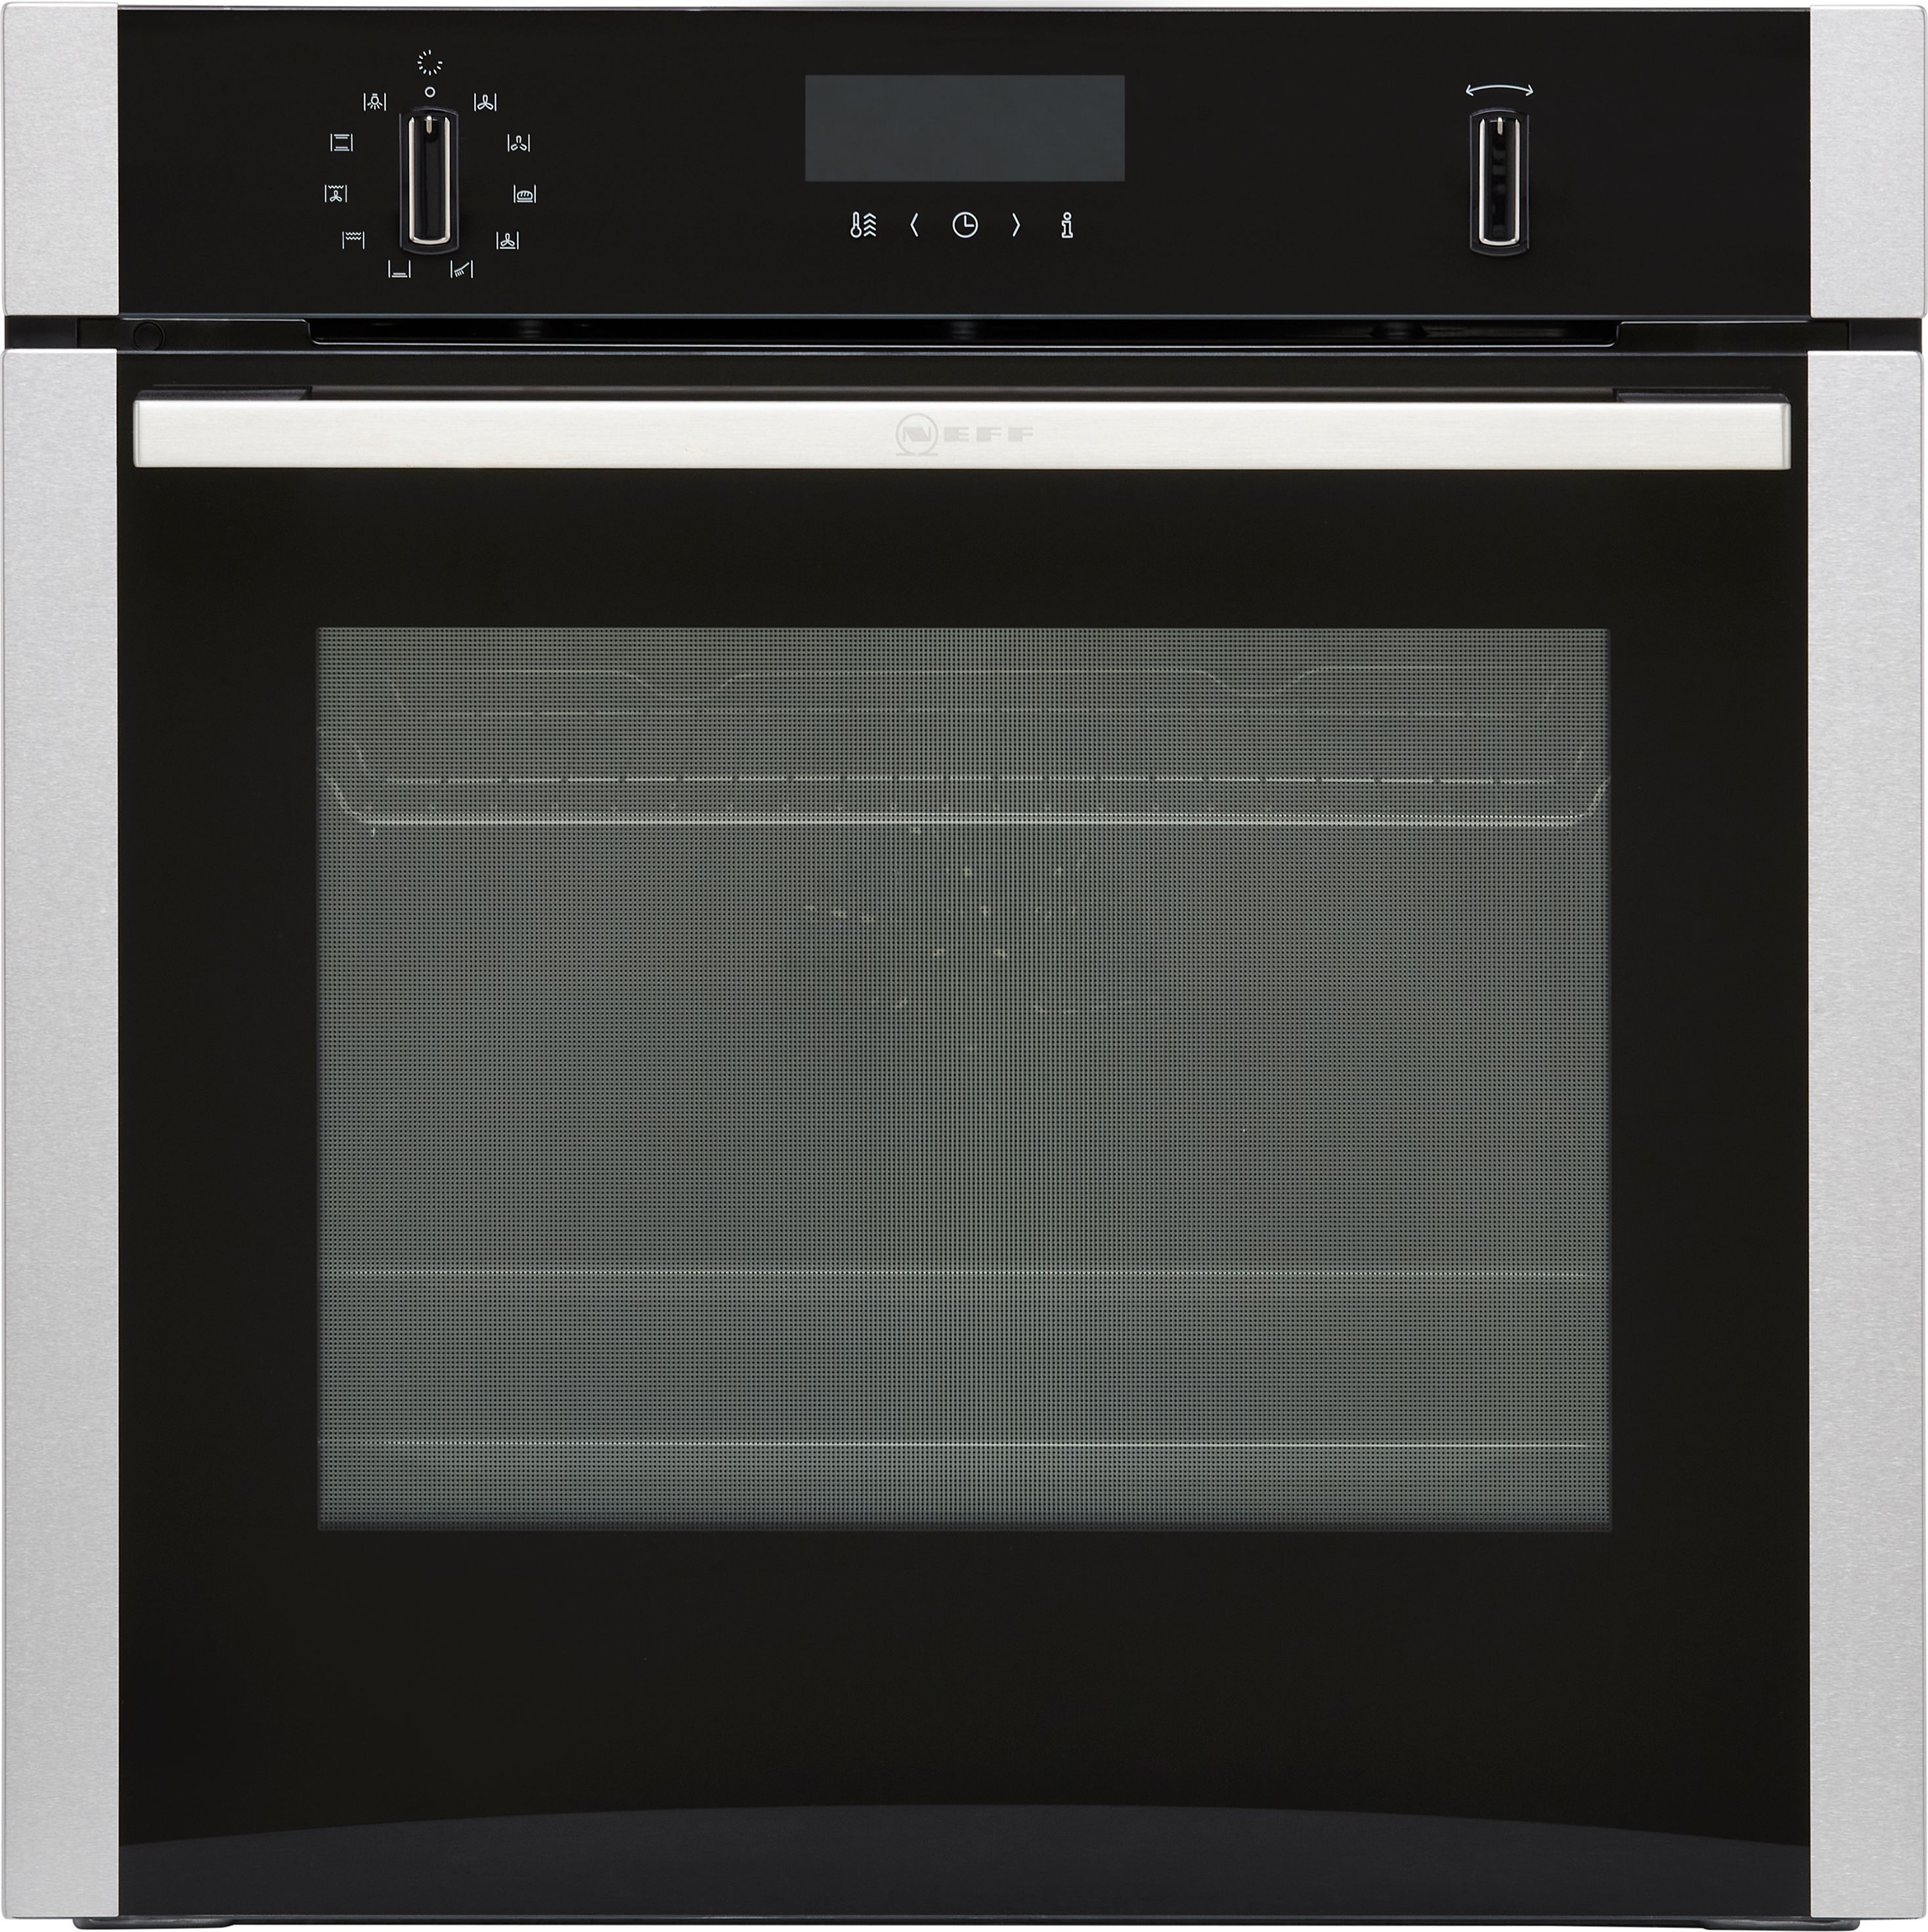 NEFF N50 B2ACH7HN0 Built In Electric Single Oven and Pyrolytic Cleaning - Stainless Steel - A Rated, Stainless Steel